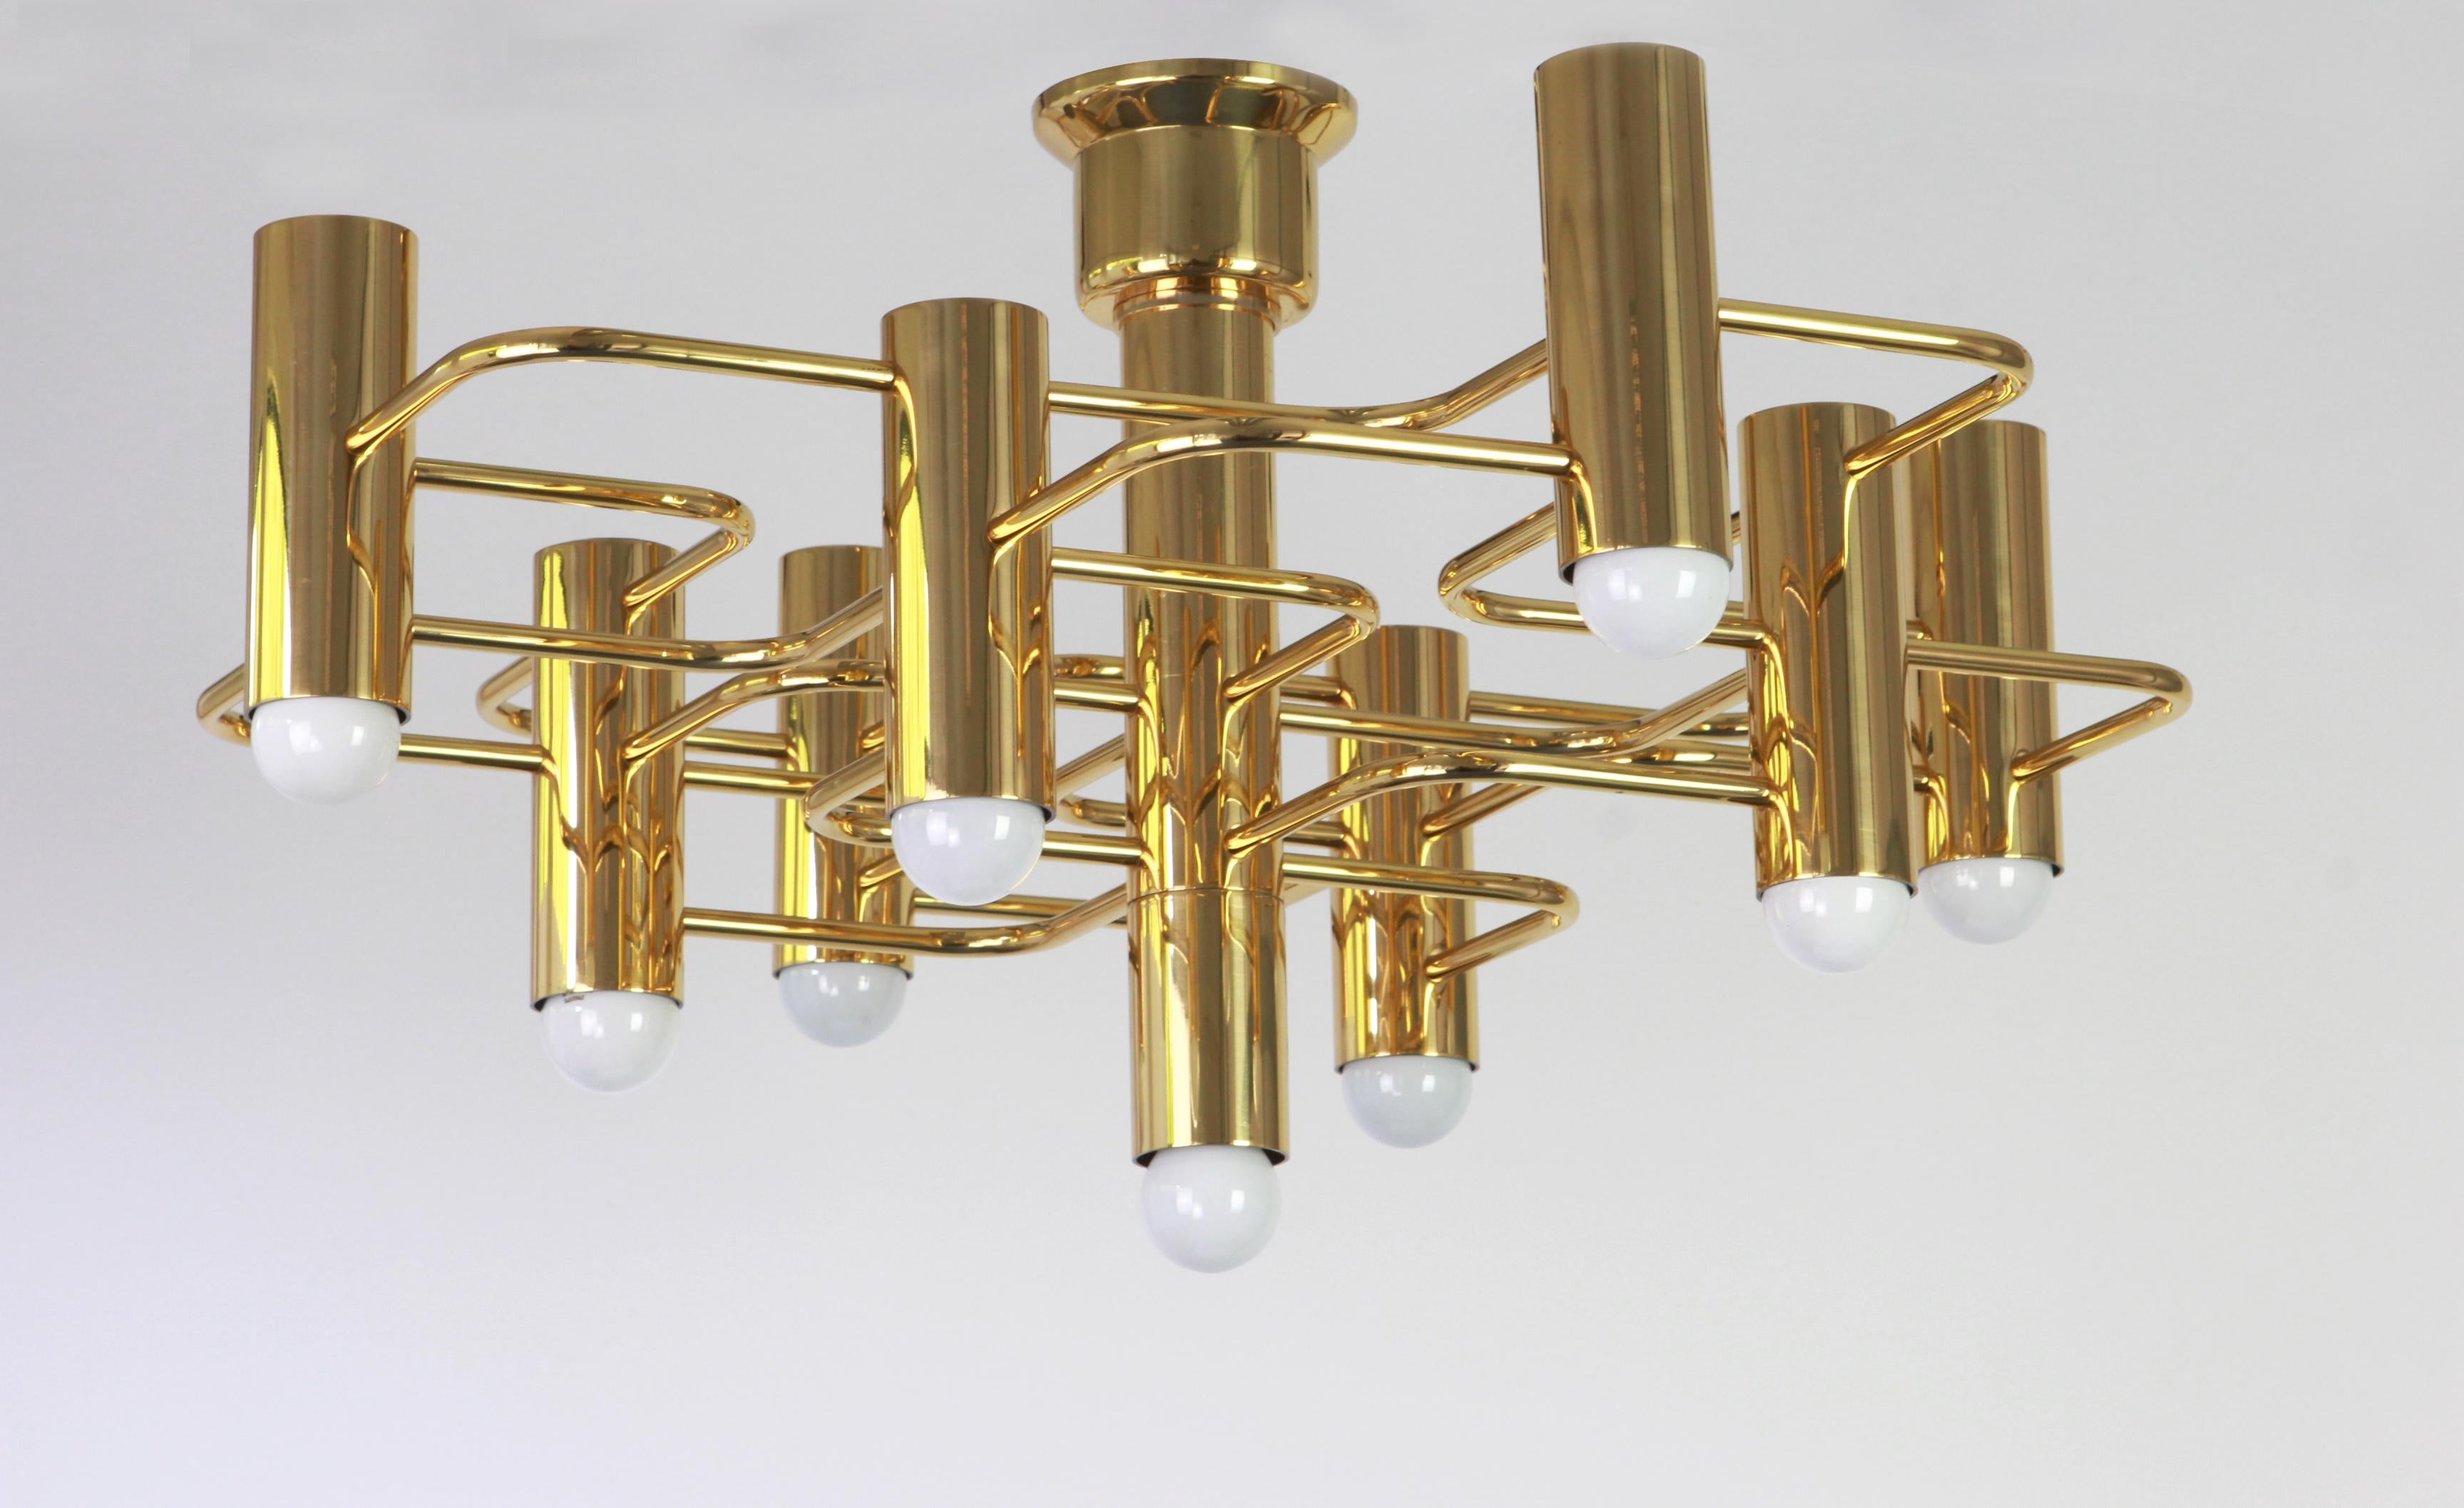 Stunning nine-light brass chandelier, designed by Sciolari in the 1970s.
Great geometrical shape.
Very good condition.
Sockets: 9 x E14 small bulbs. (max. 40 watts each)
Light bulbs are not included. It is possible to install this fixture in all